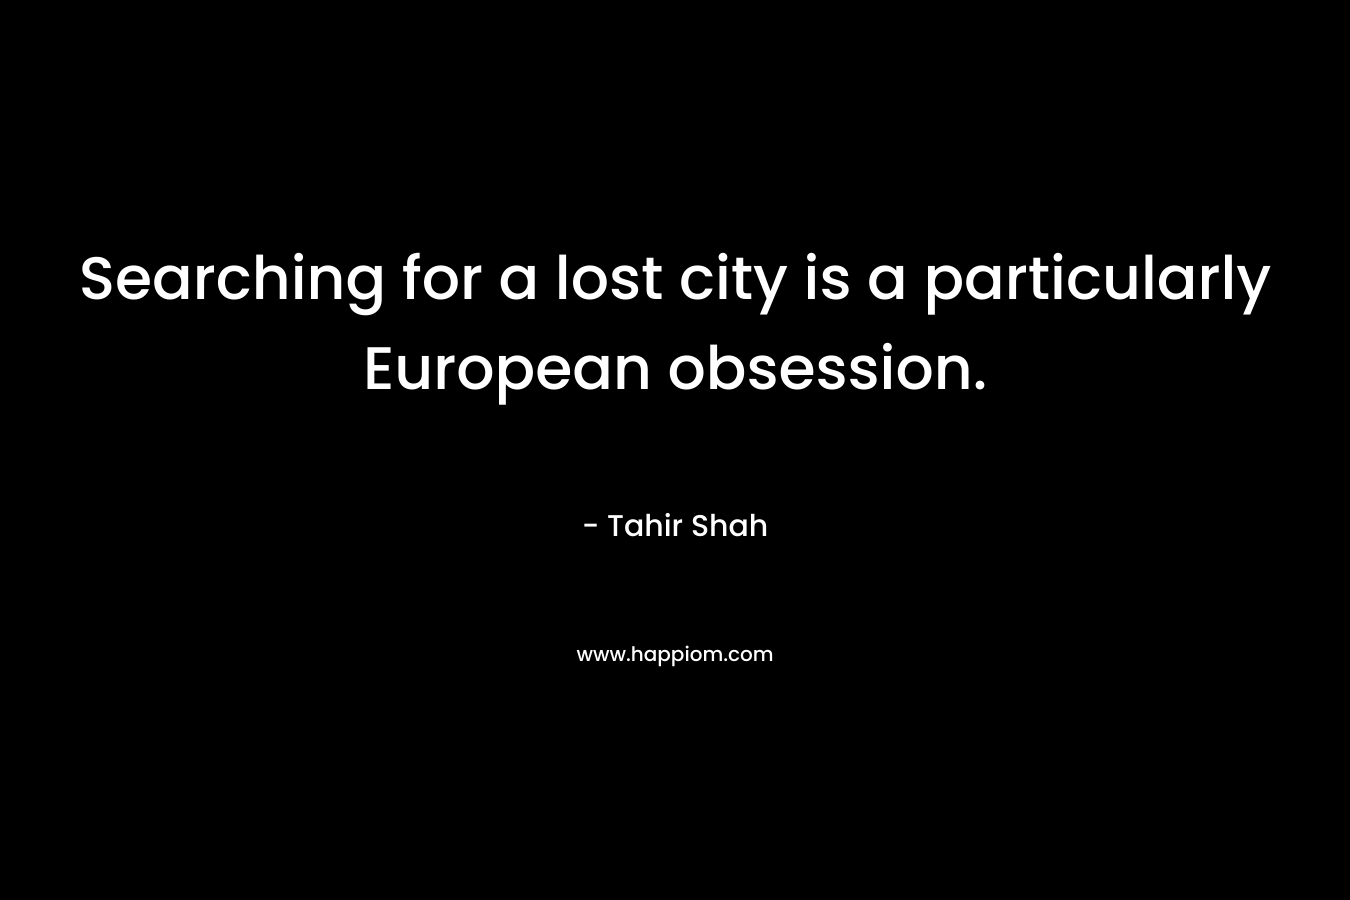 Searching for a lost city is a particularly European obsession. – Tahir Shah